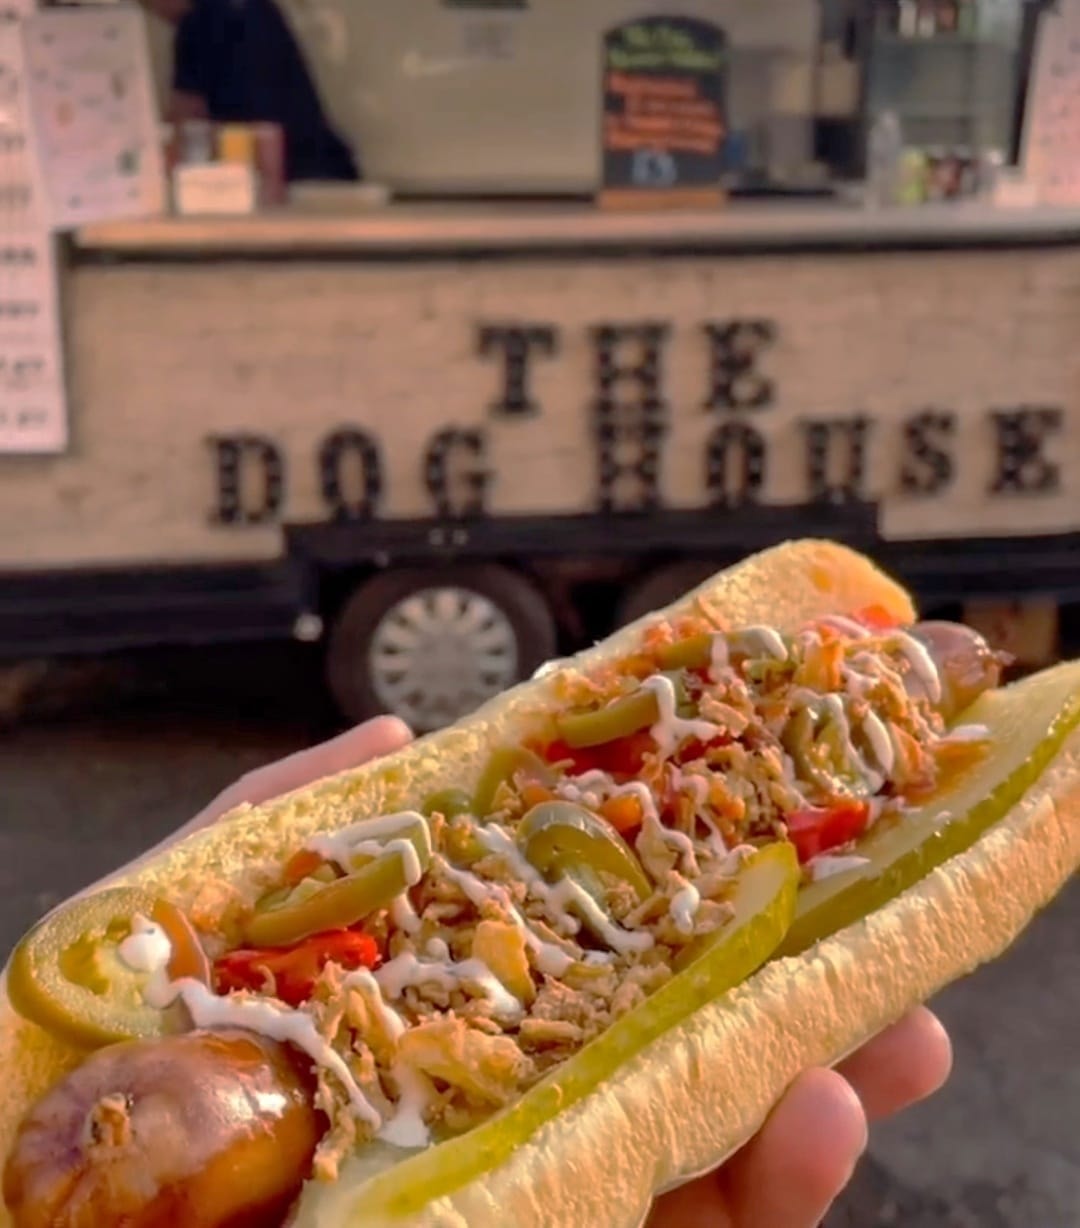 Gourmet Hotdogs from Well Loved Classics to Distinguished Blue Cheese